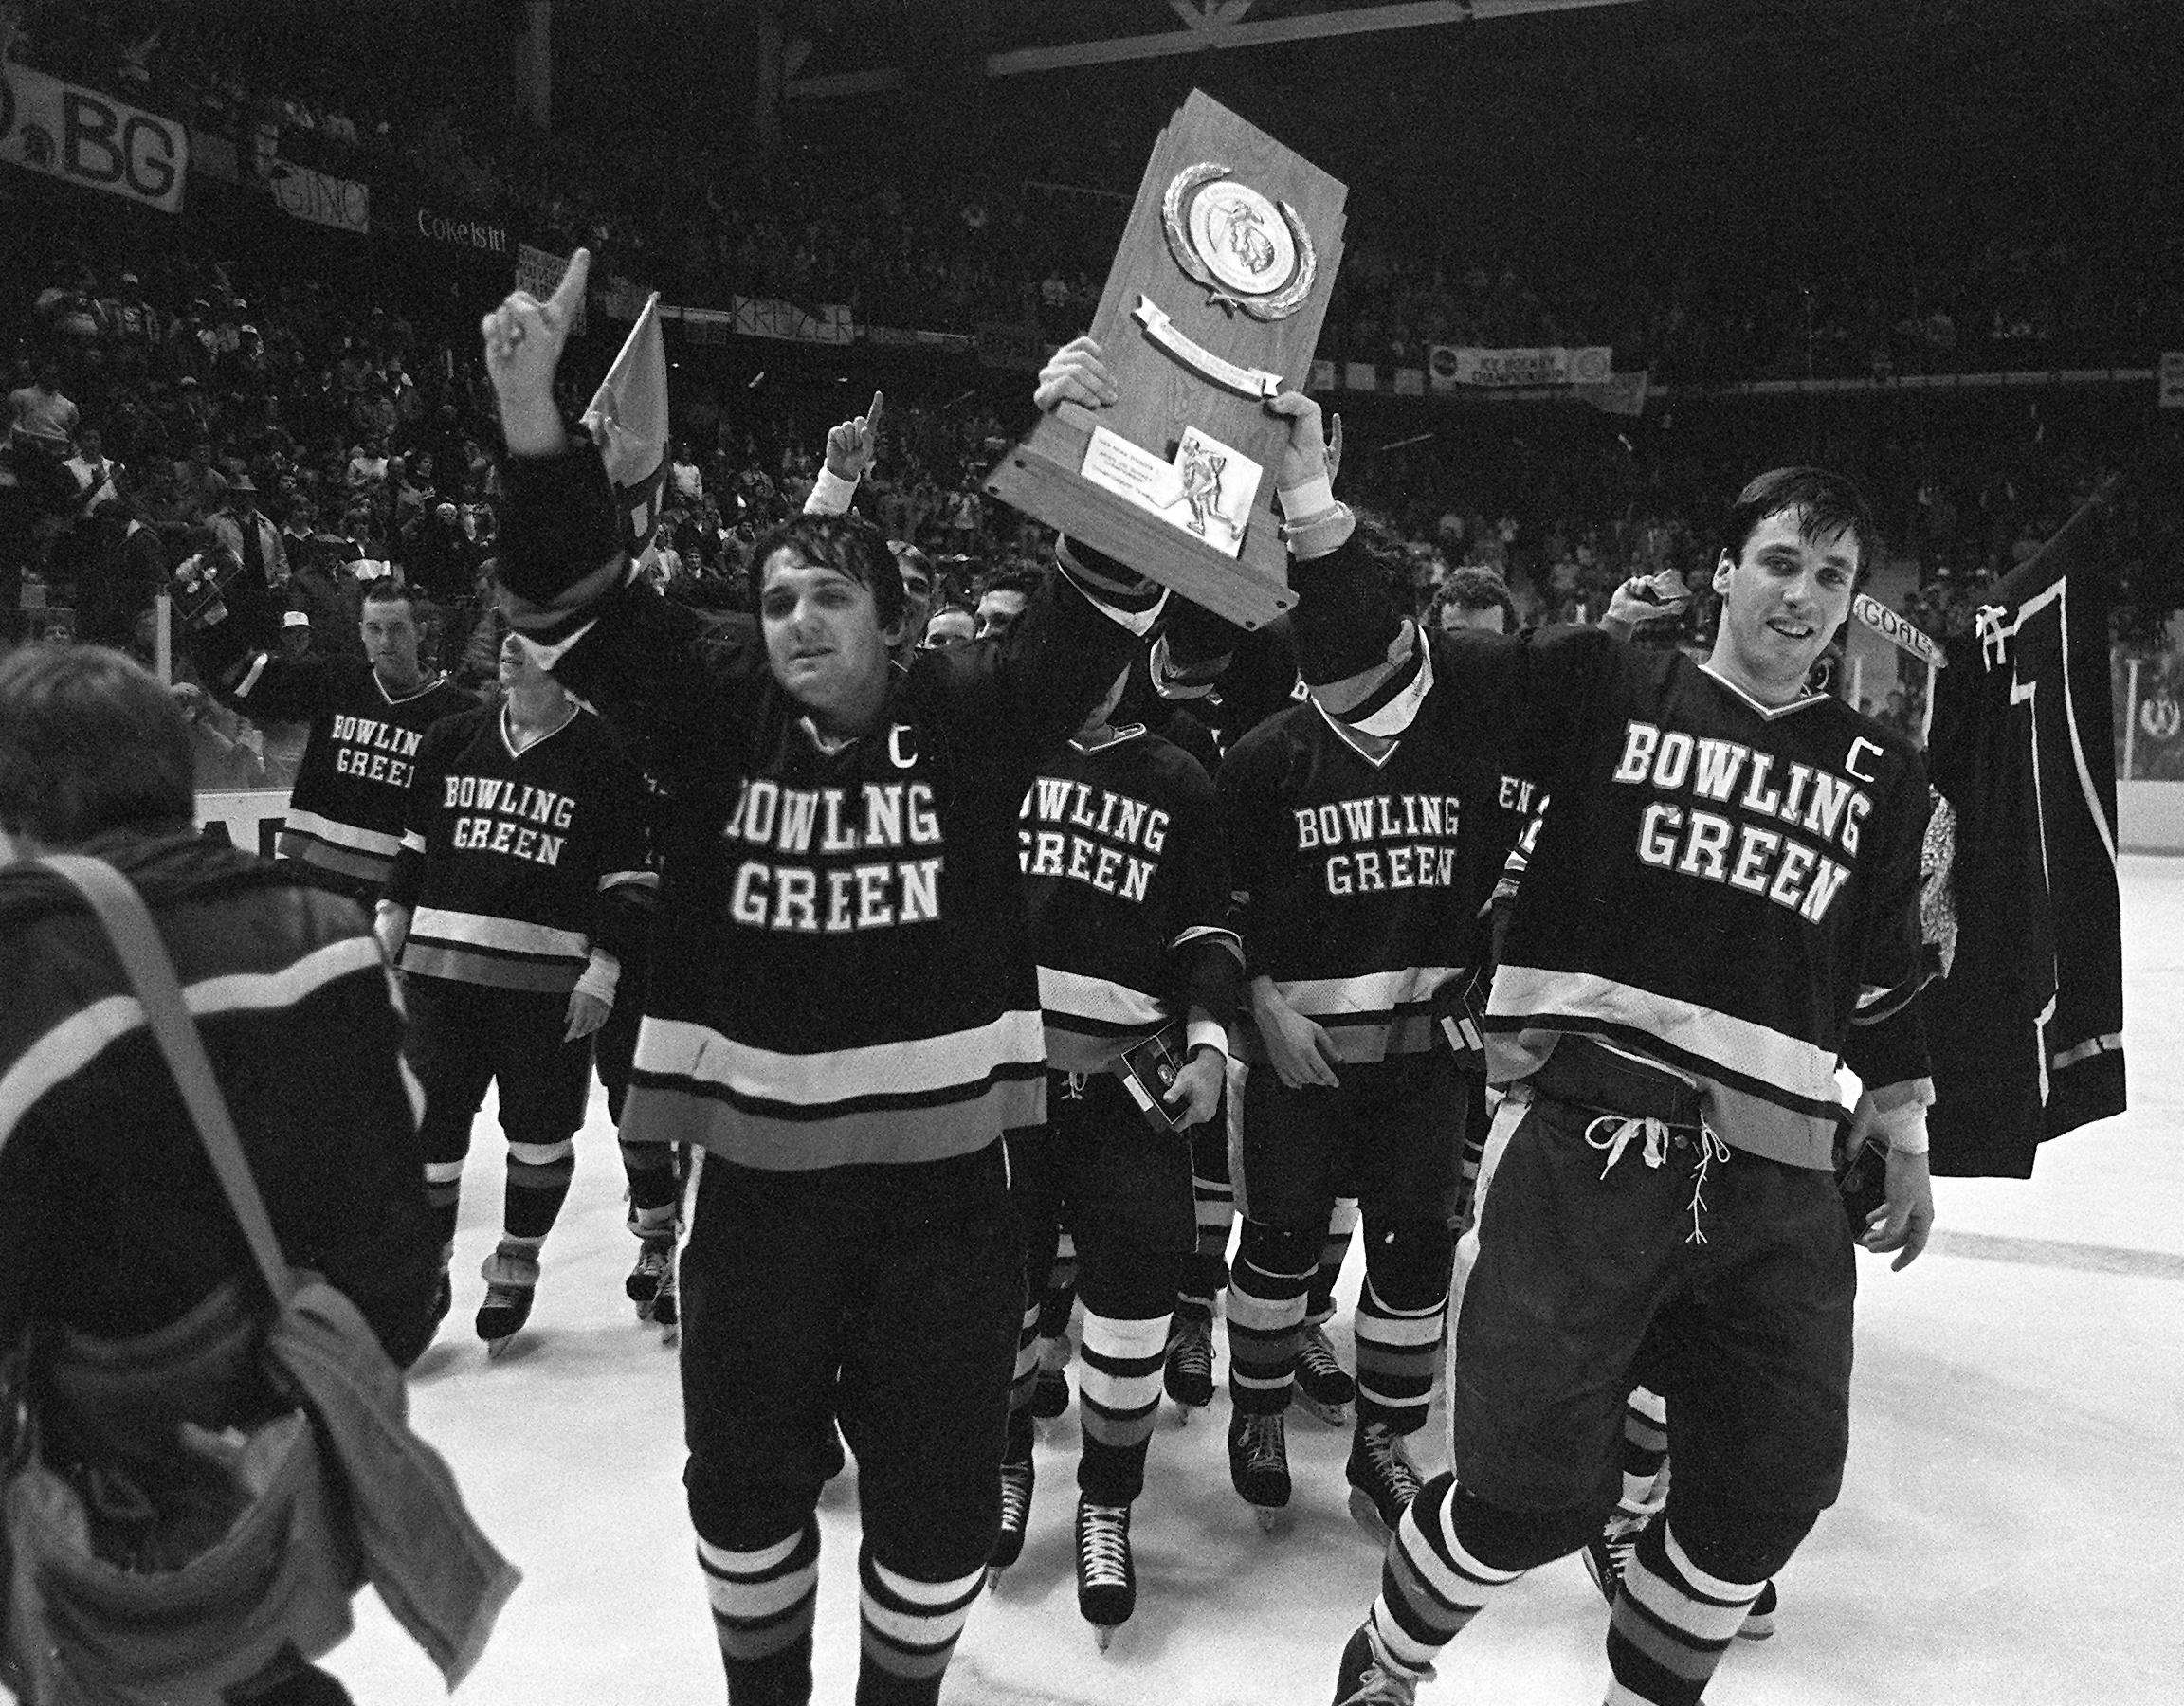 Two hockey players, Mike Pikul and Wayne Wilson, both hold an NCAA championship trophy in a black-and-white photo from 1984.